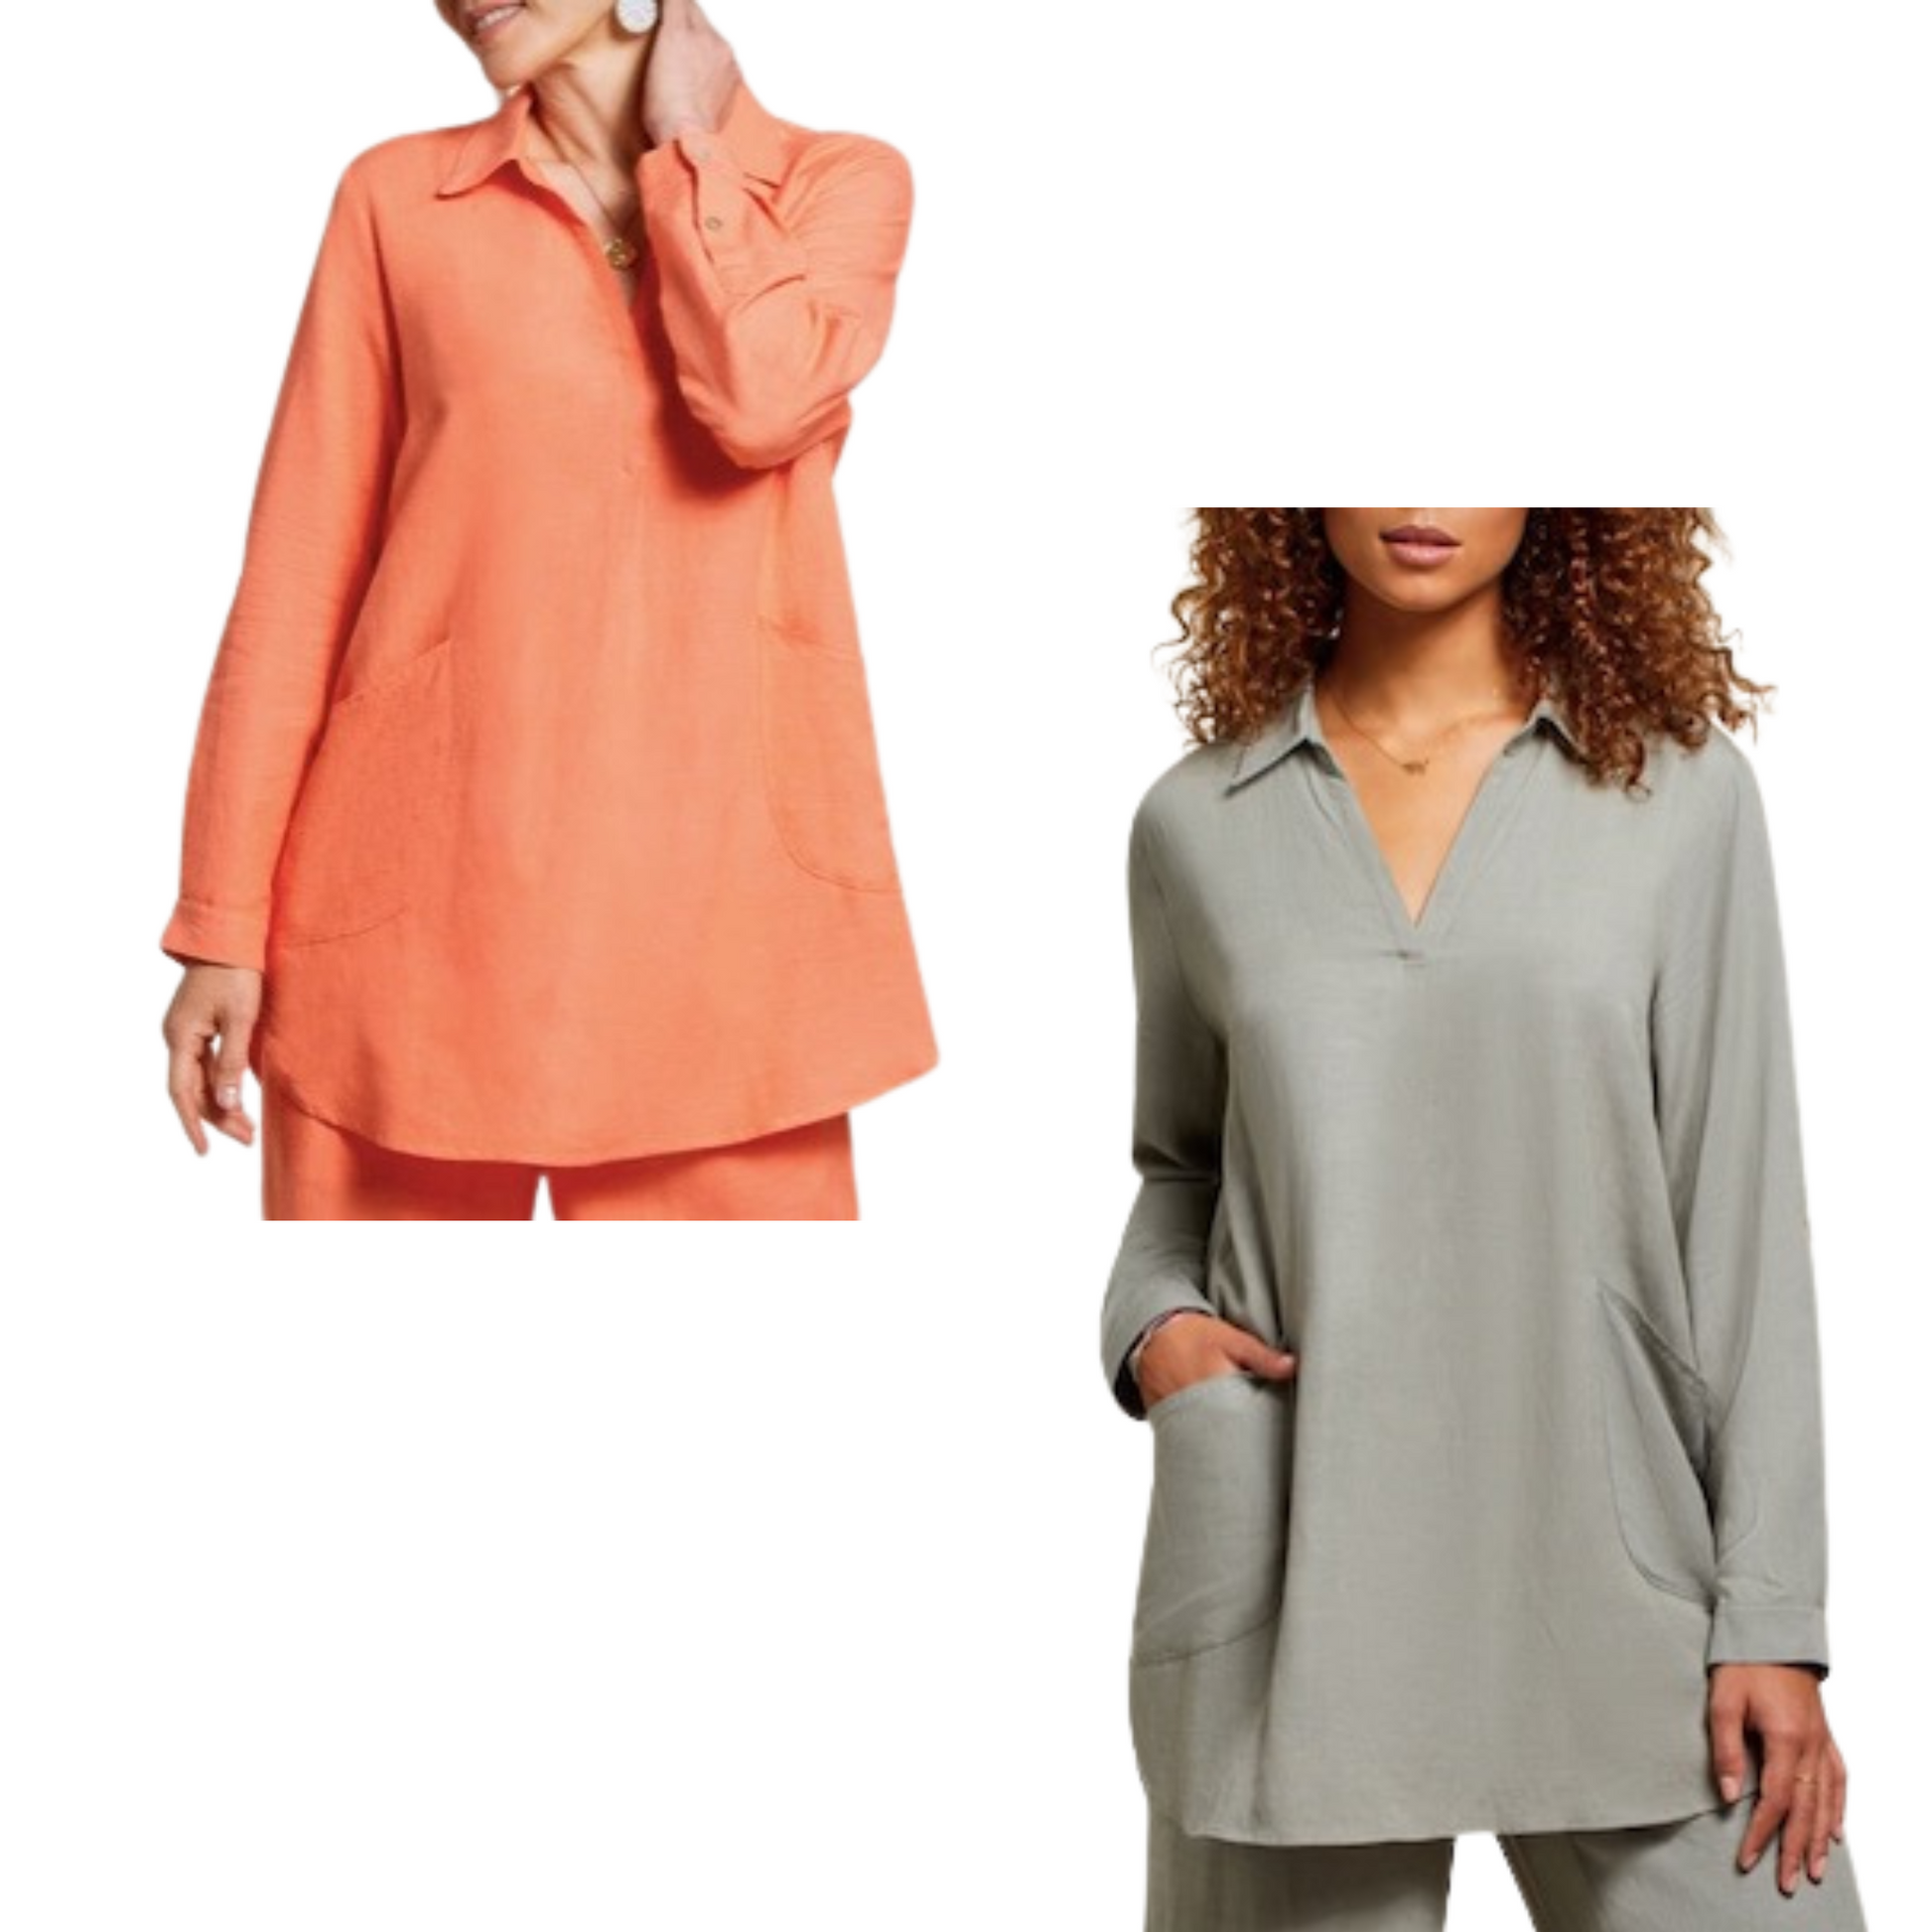 This long sleeve tunic blouse comes in two stylish colors: coral and bay leaf. The loose fit design features long sleeves, a v neck, and a classic collared style – showcasing effortless sophistication. Perfect for a chic look for any occasion.